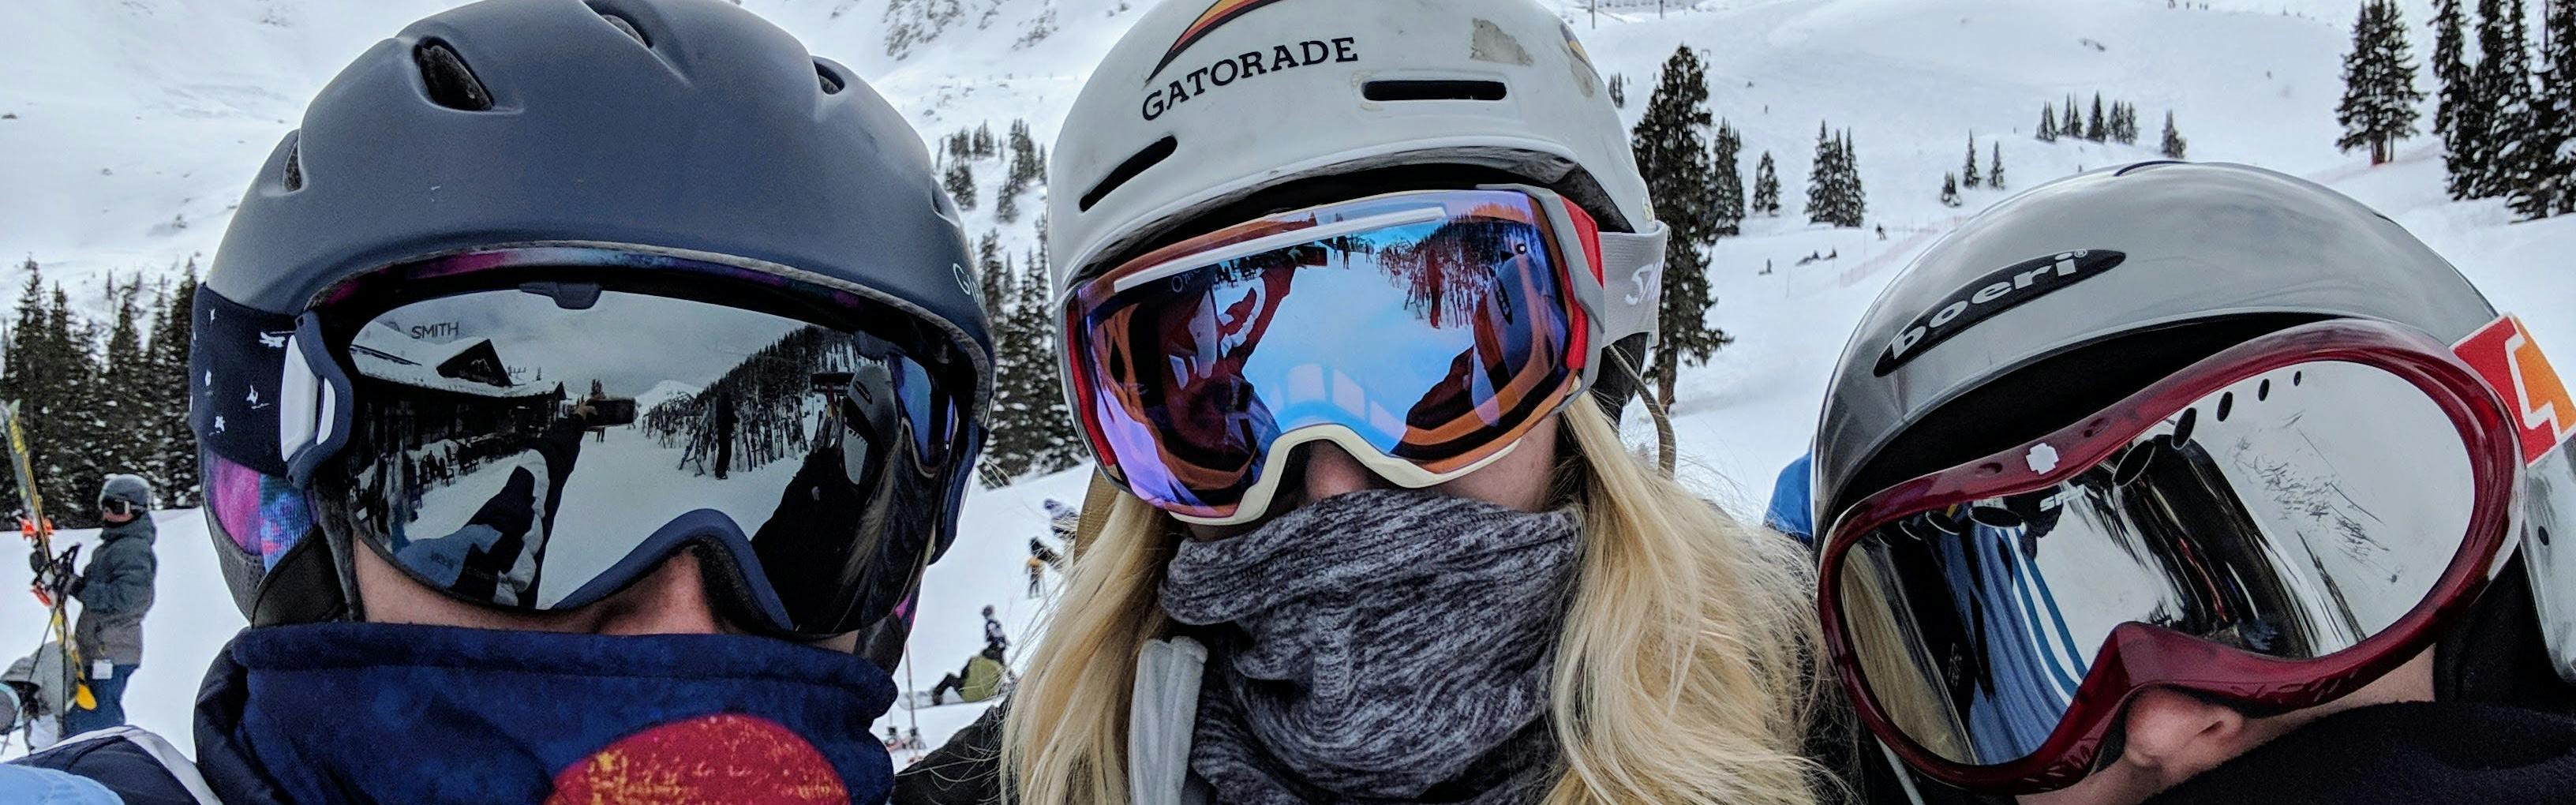 How Often Do You Need To Replace Your Ski or Snowboard Helmet